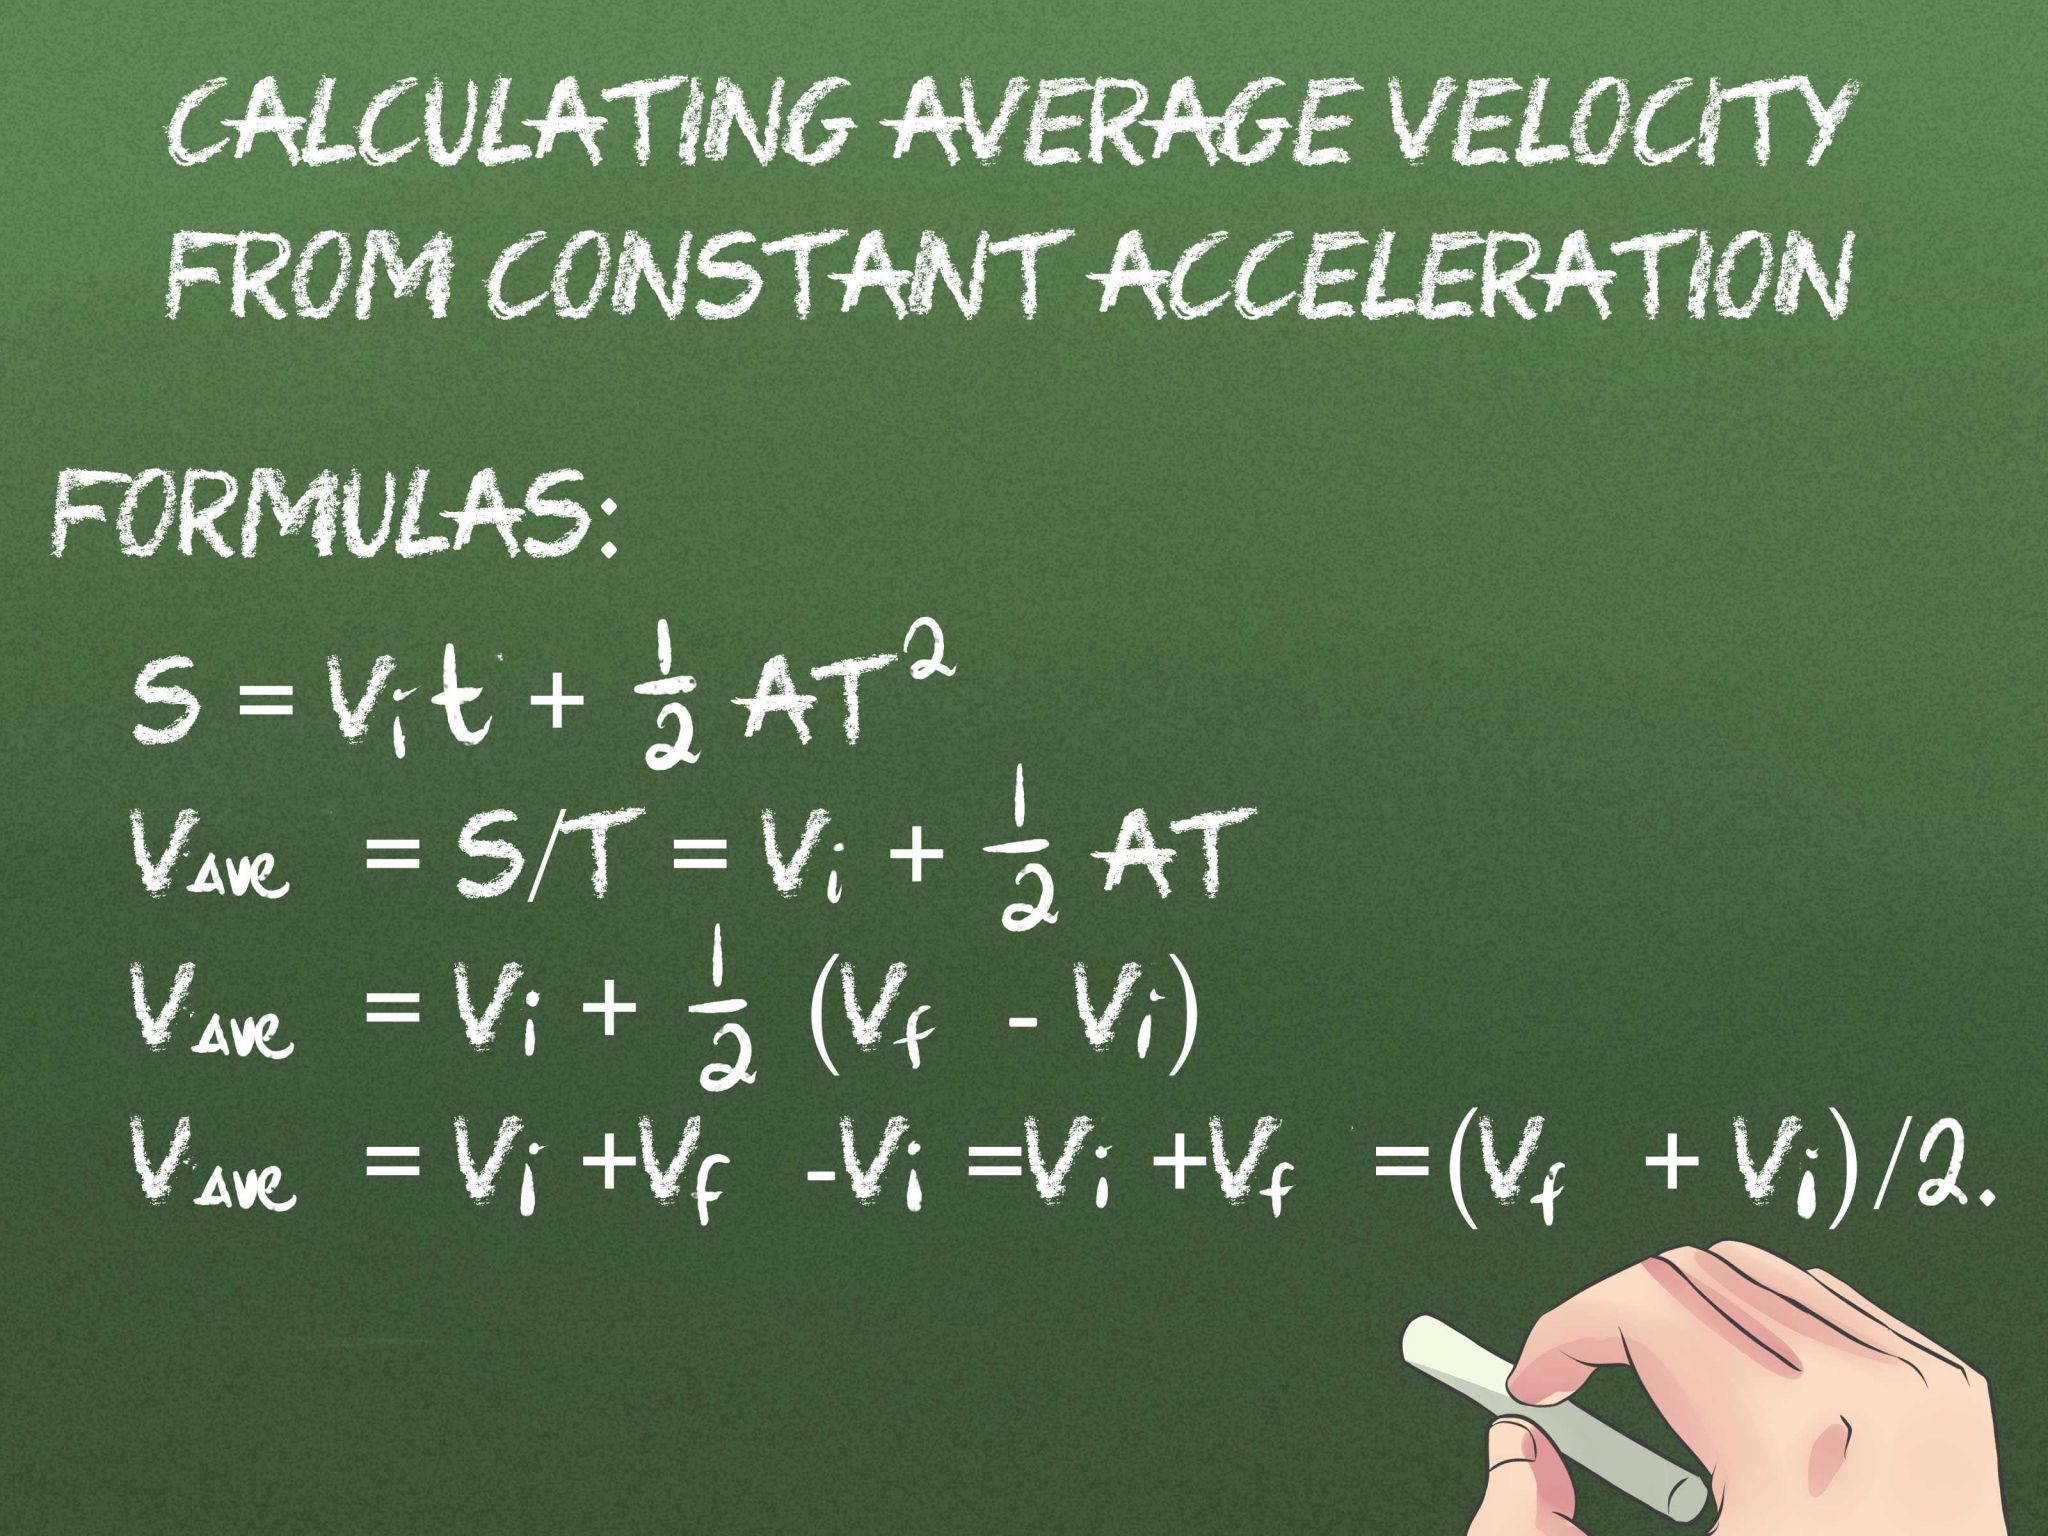 Mass Weight and Gravity Worksheet Answers Also How to Calculate Average Velocity 12 Steps with